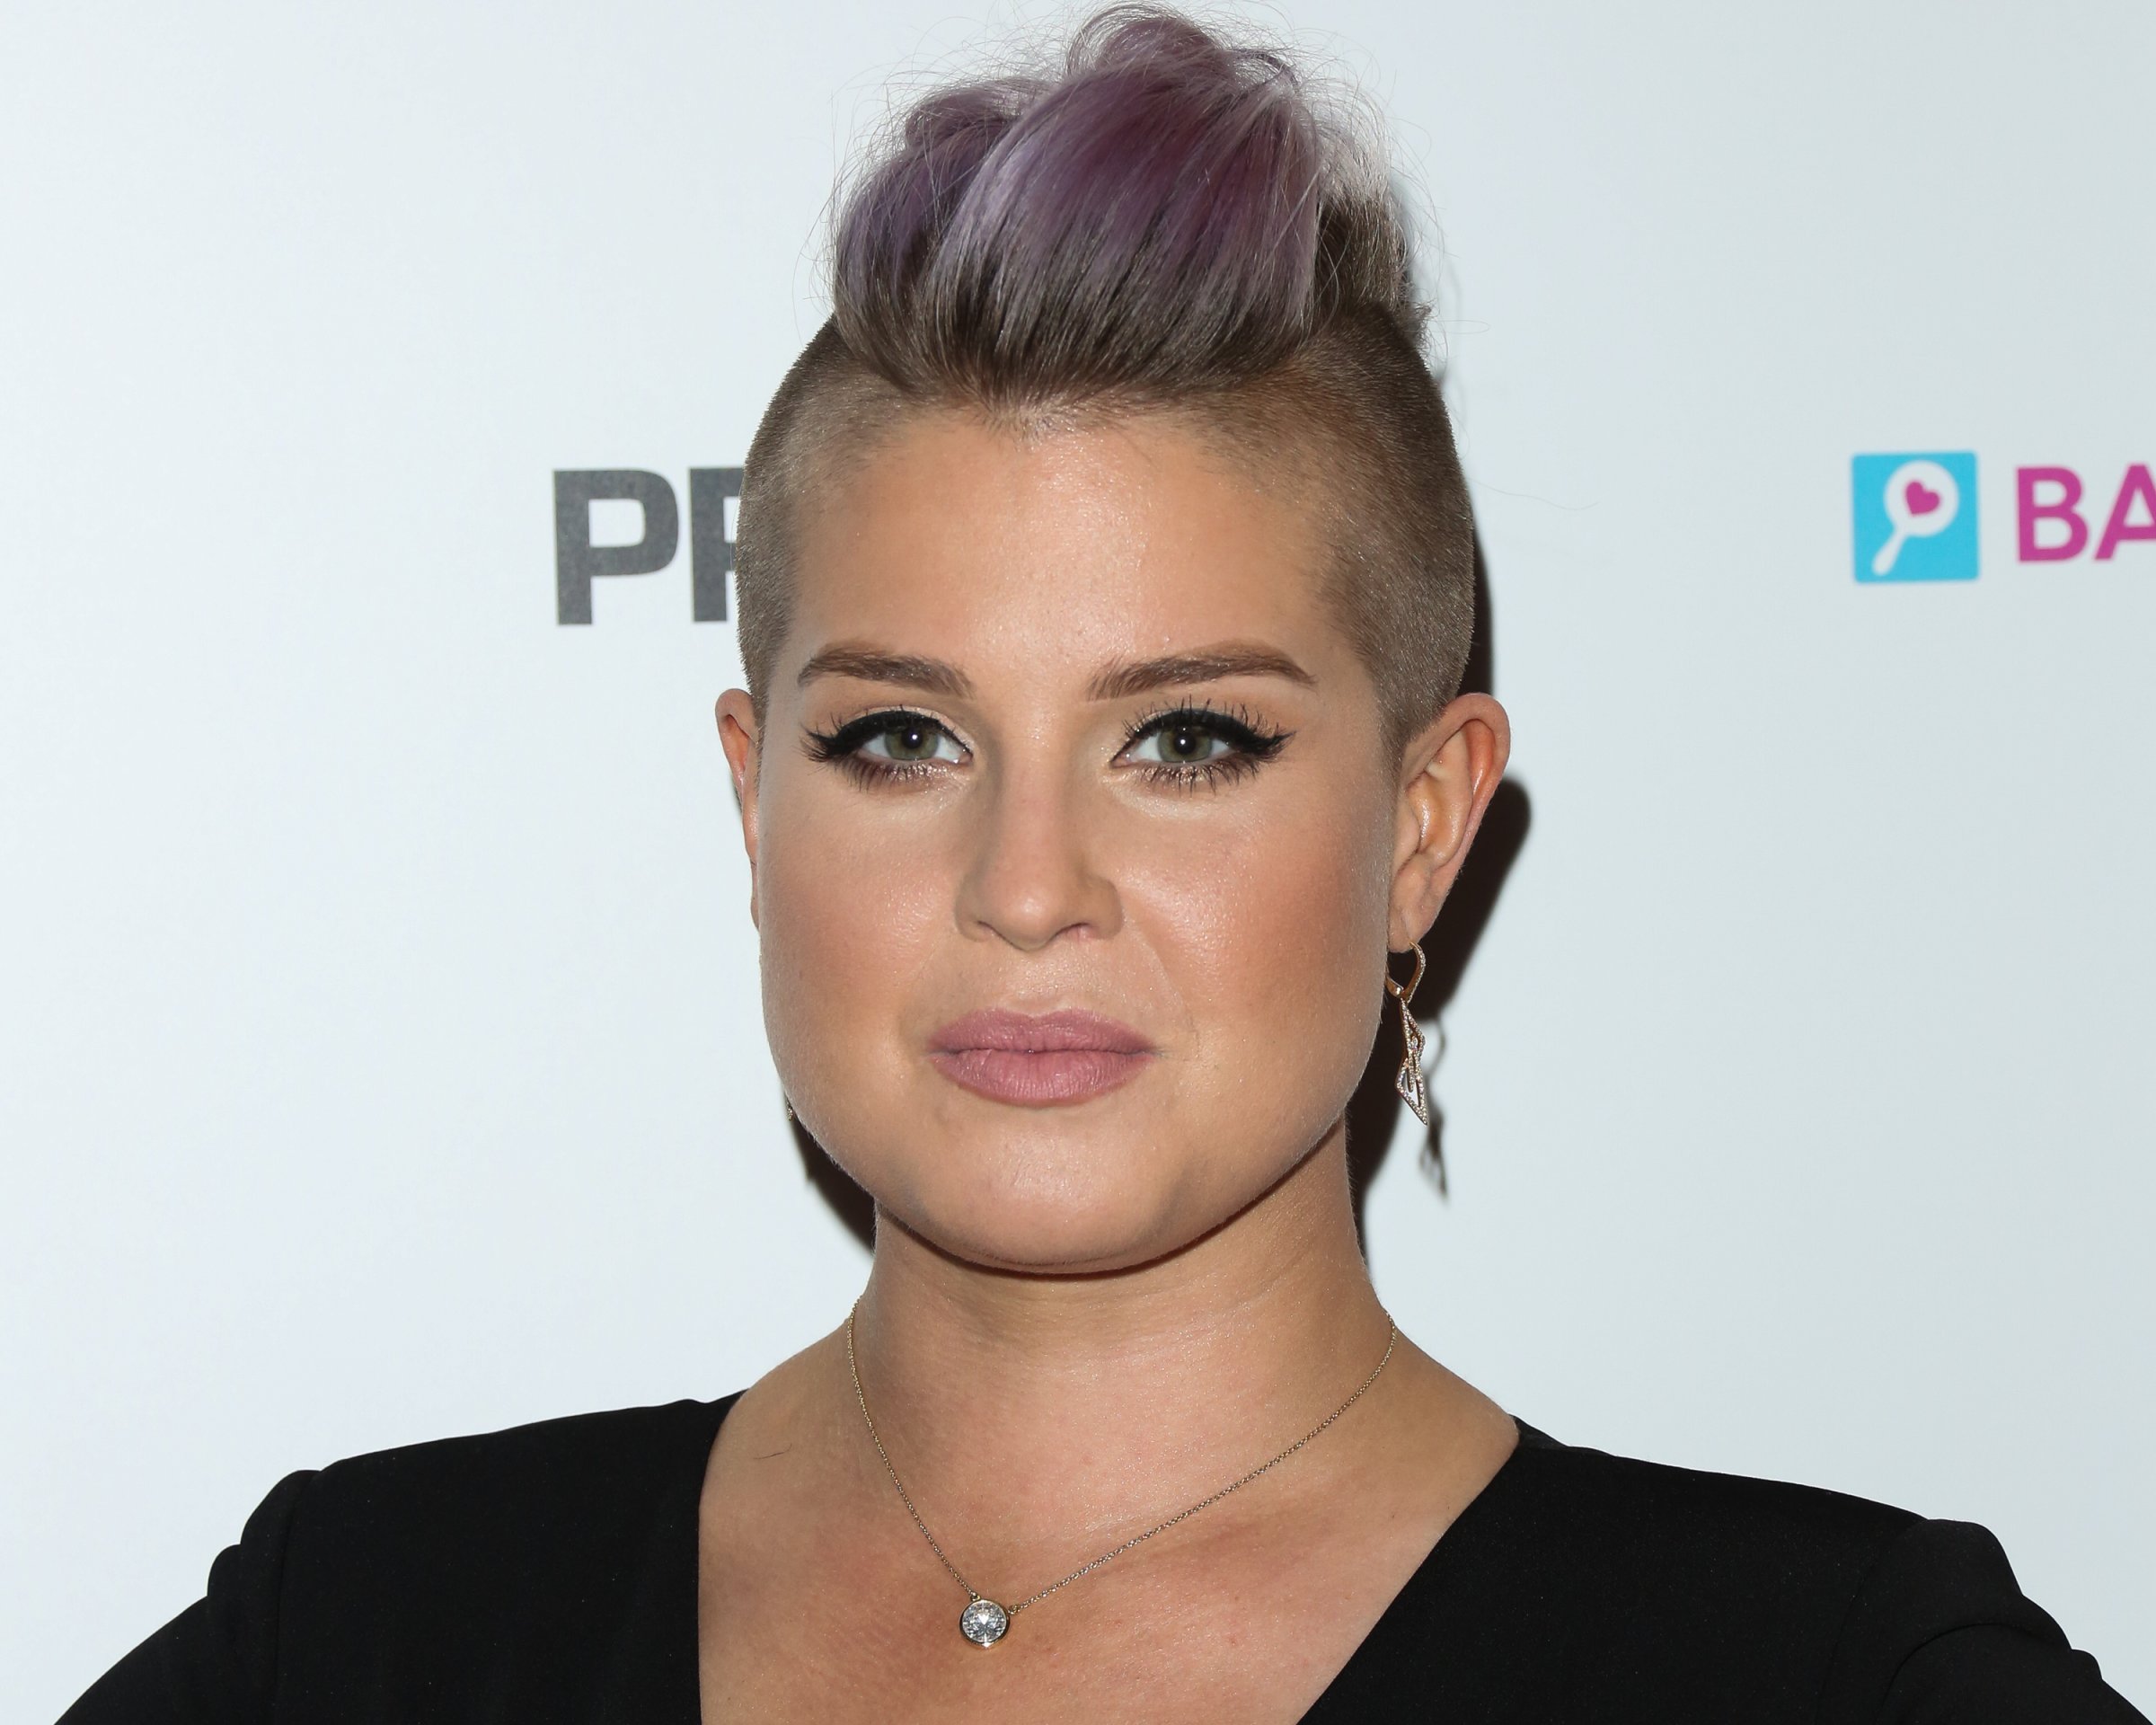 TV Personality Kelly Osbourne attends "The Babes For Boobs" charity event benefitting the Los Angeles county affiliate of the Susan G. Komen foundation on June 16, 2016 in Los Angeles.